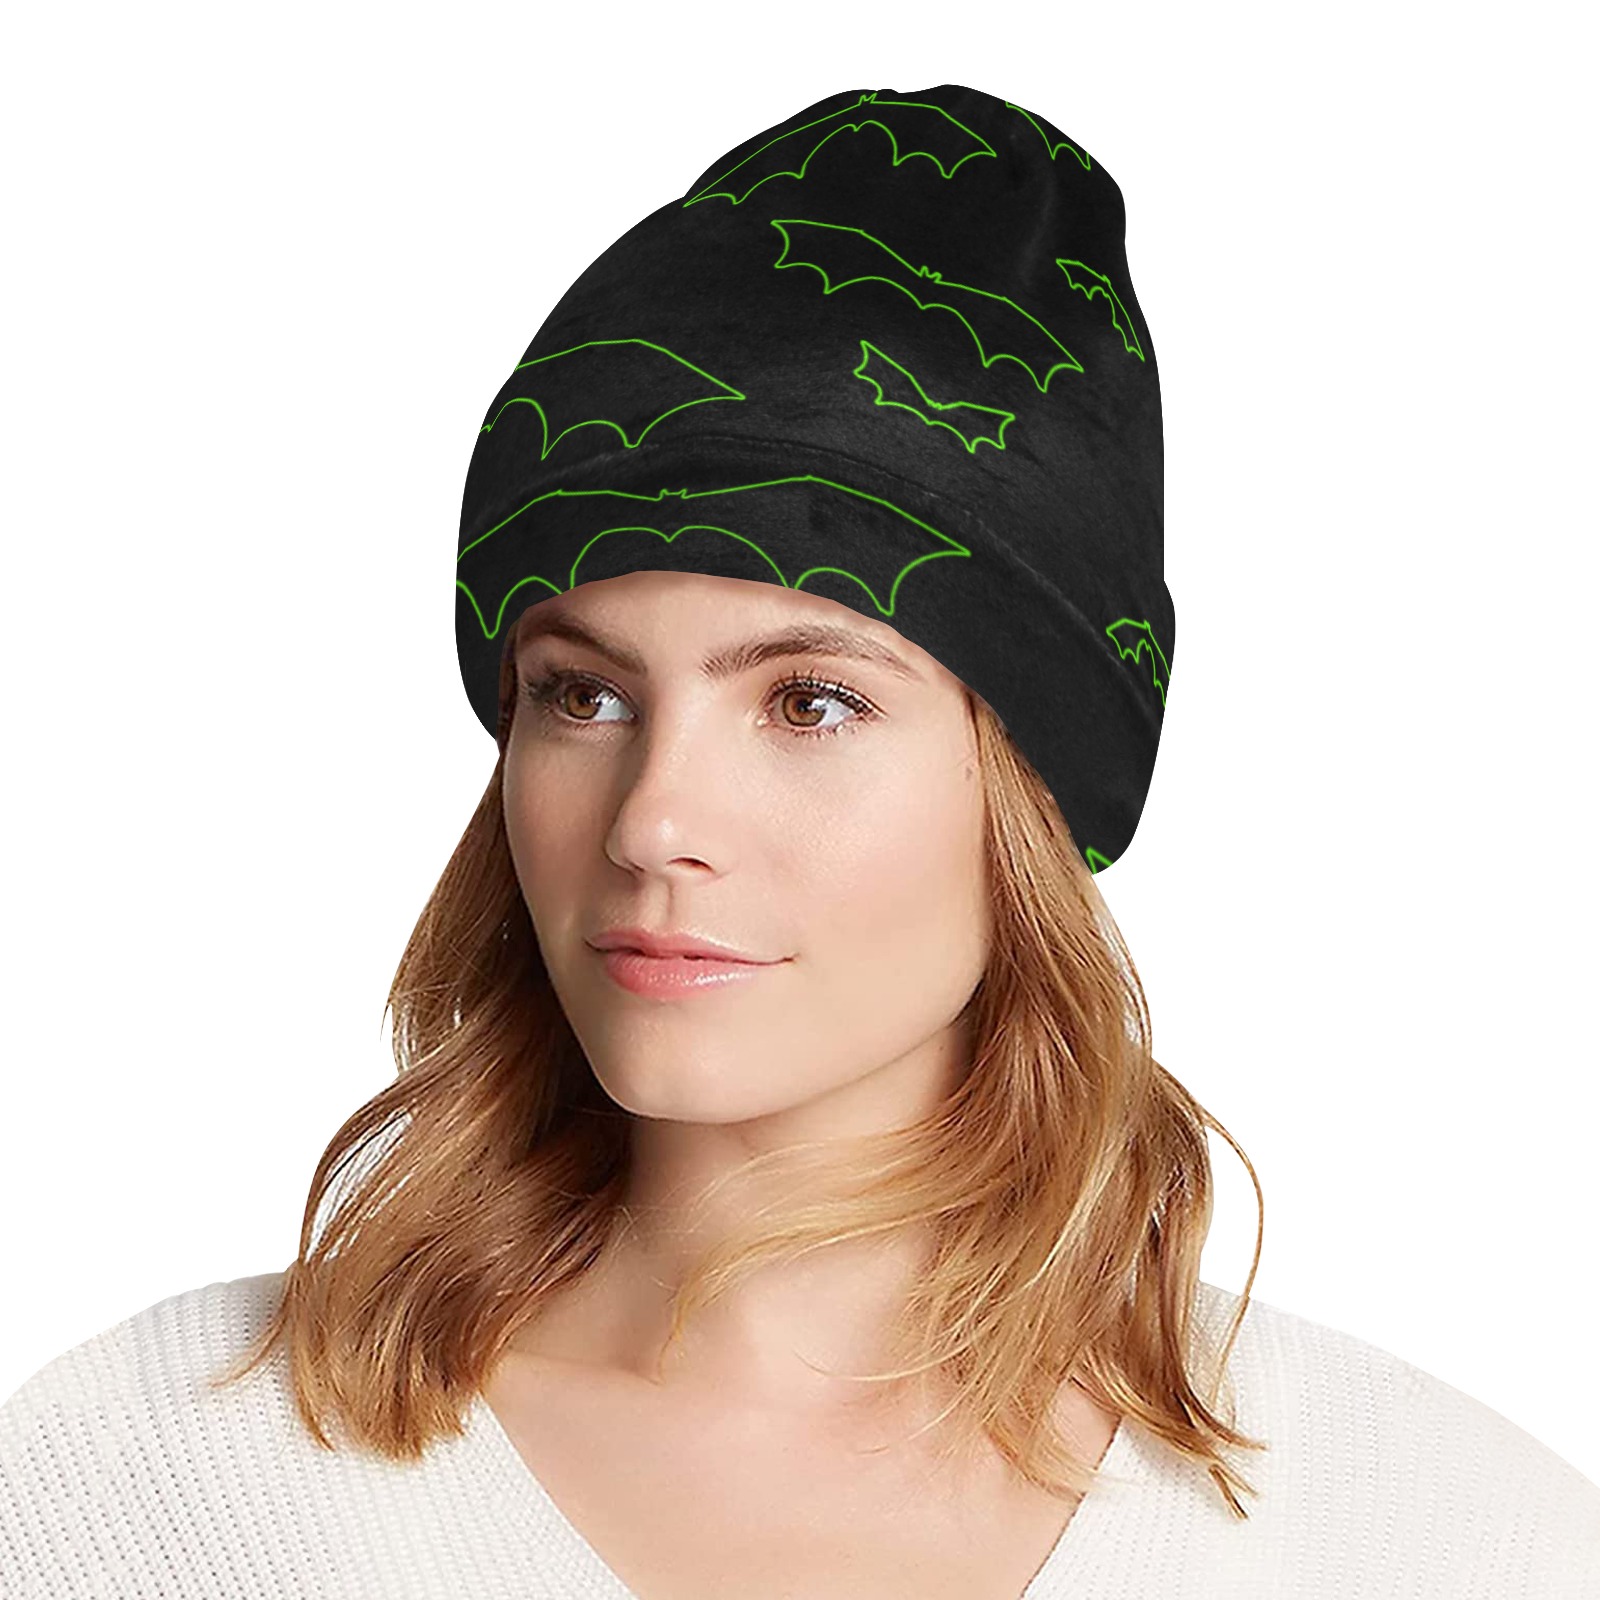 Neon Green Bats All Over Print Beanie for Adults